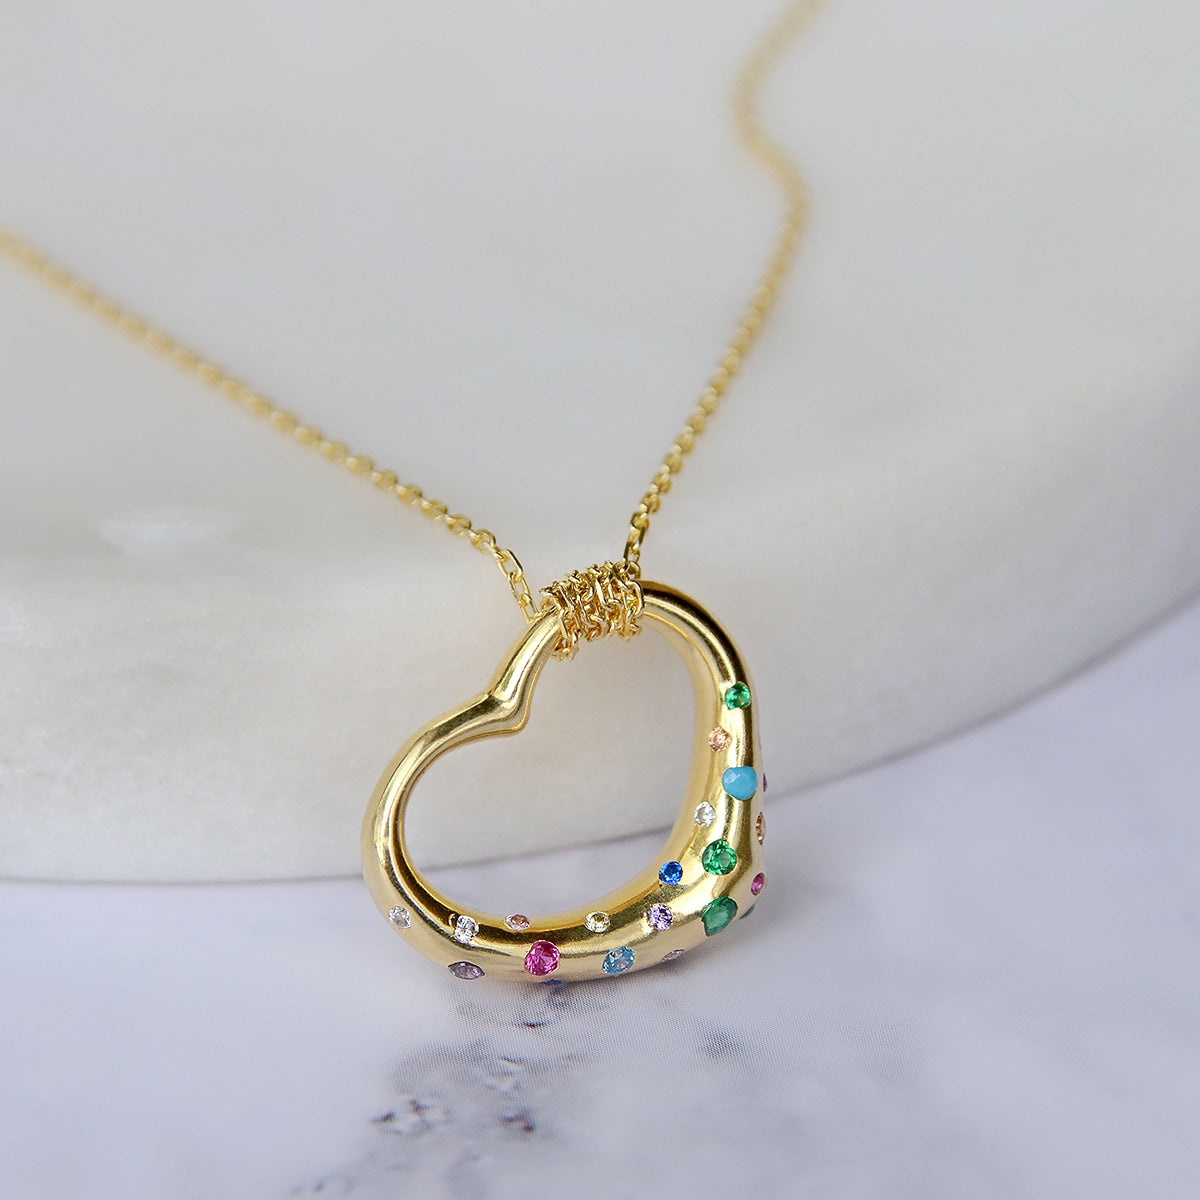 To My Daughter, Little Mermaid - Chain Wrap Gold Heart Necklace Gift Set